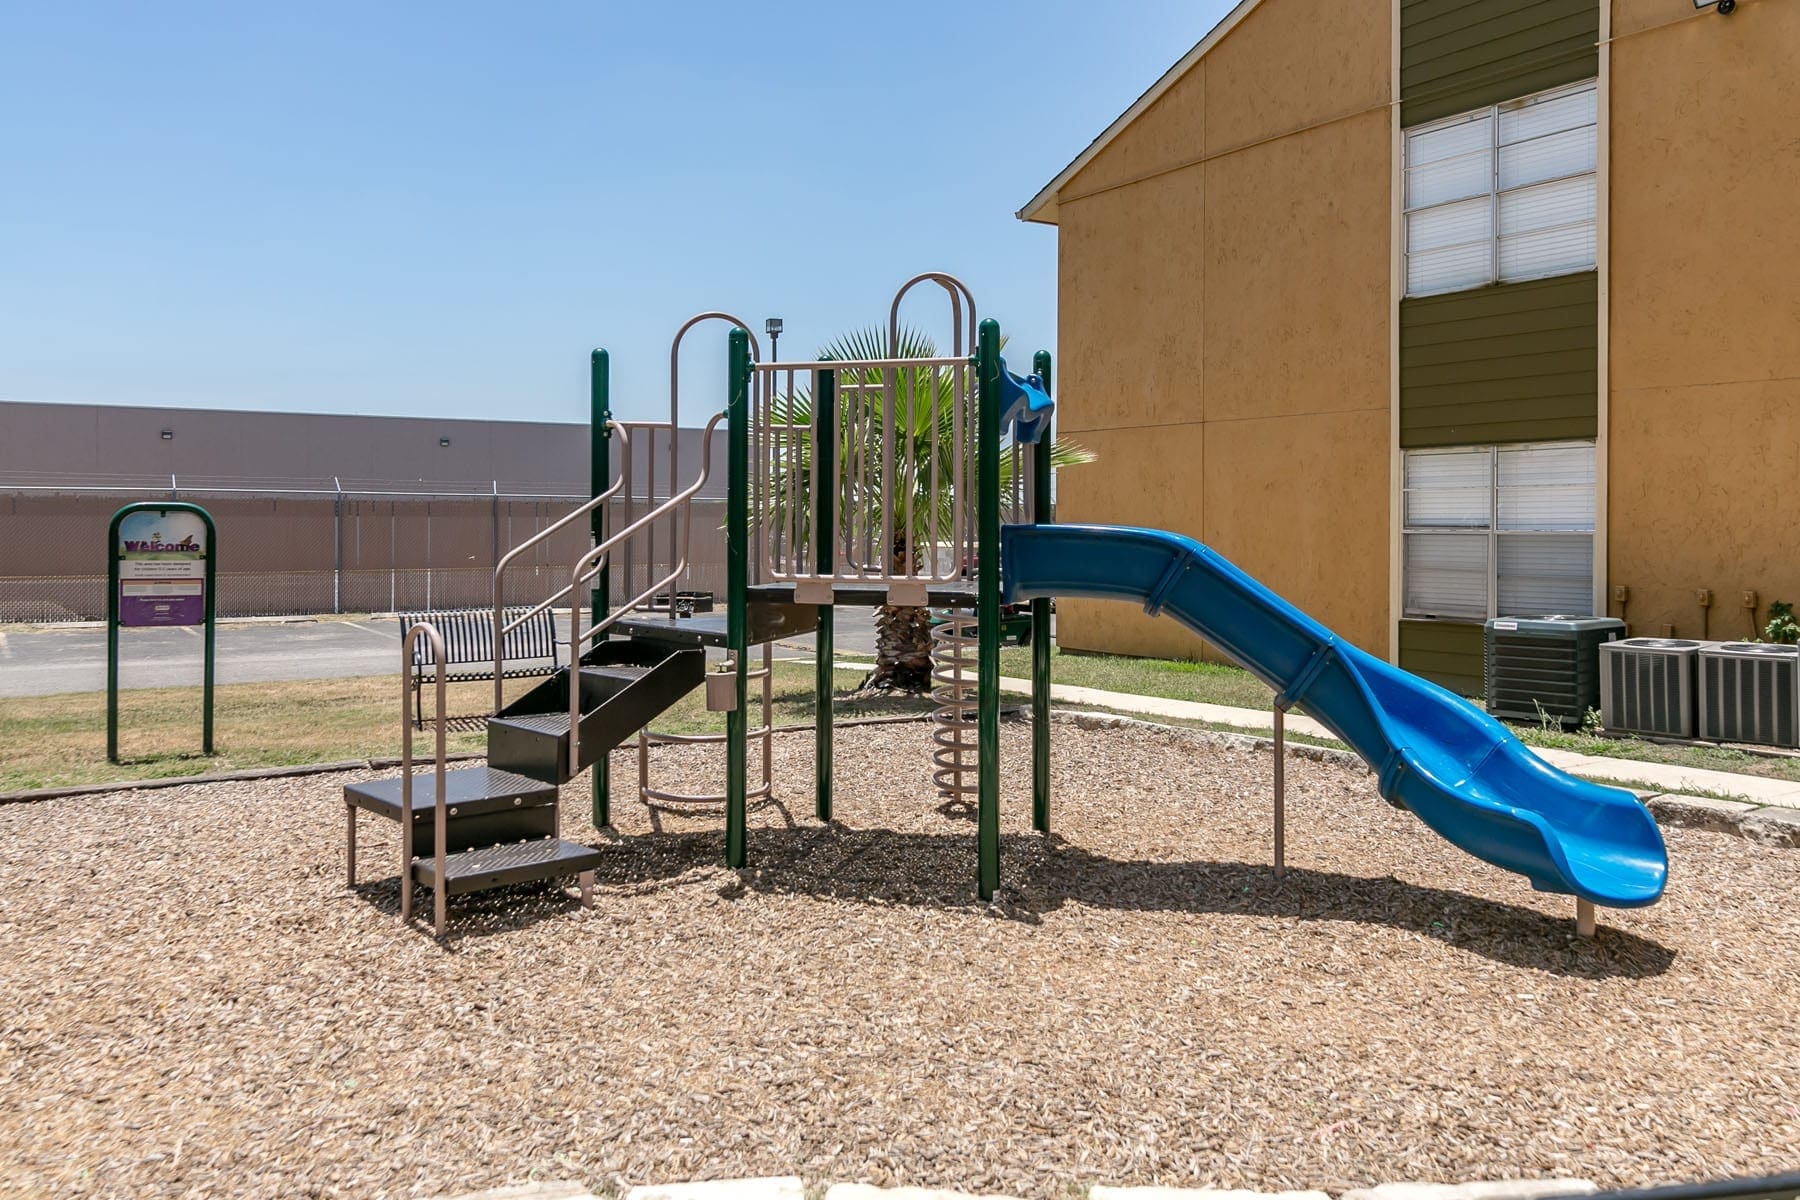 Apartments in San Antonio, TX for Rent - City-Base Vista - Playground with Slide, Bench Seating, and Woodchips